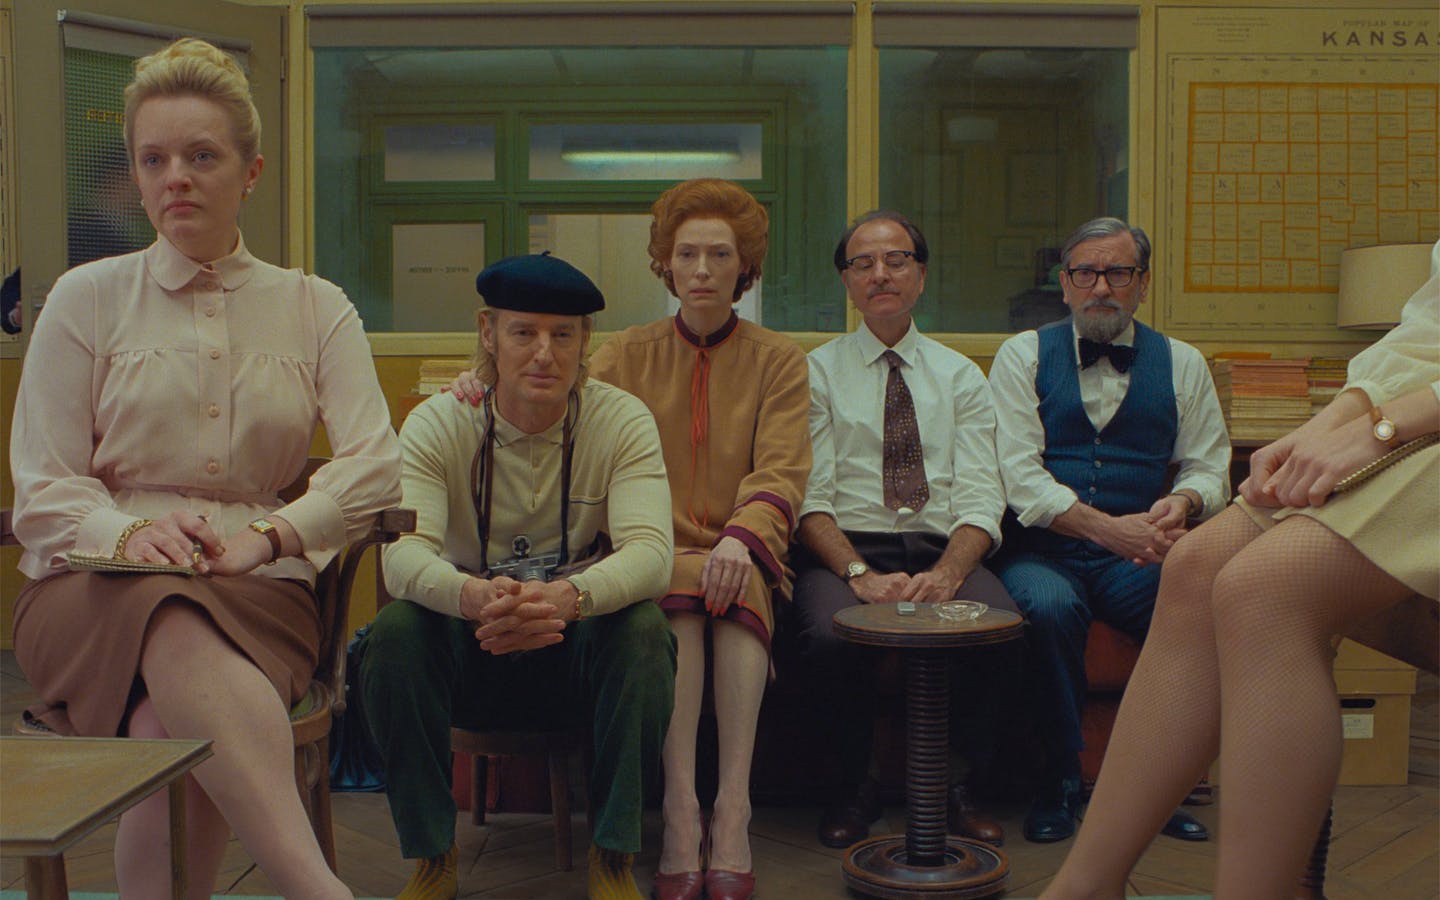 TheSocialTalks - A Breakdown of Wes Anderson's Whimsical